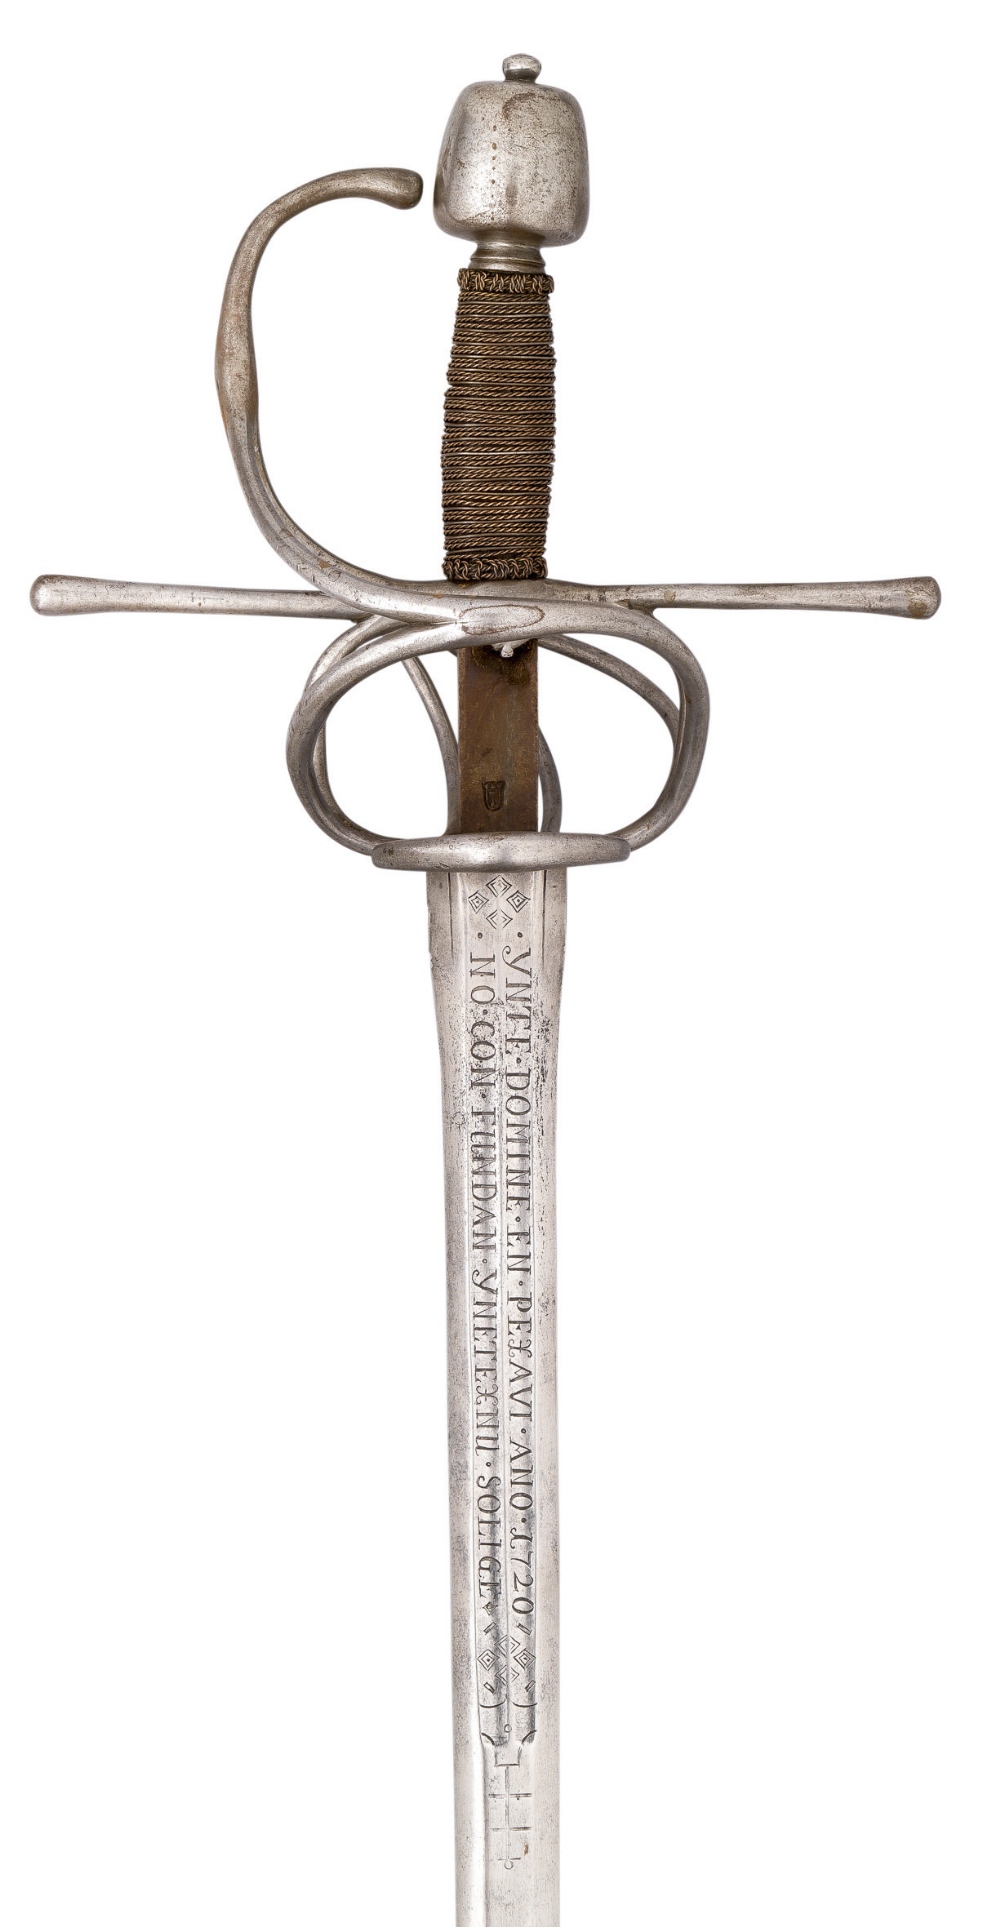 **A COMPOSITE RAPIER, 18TH AND 19TH CENTURIESwithfullered blade stamped with `YnteDomine en